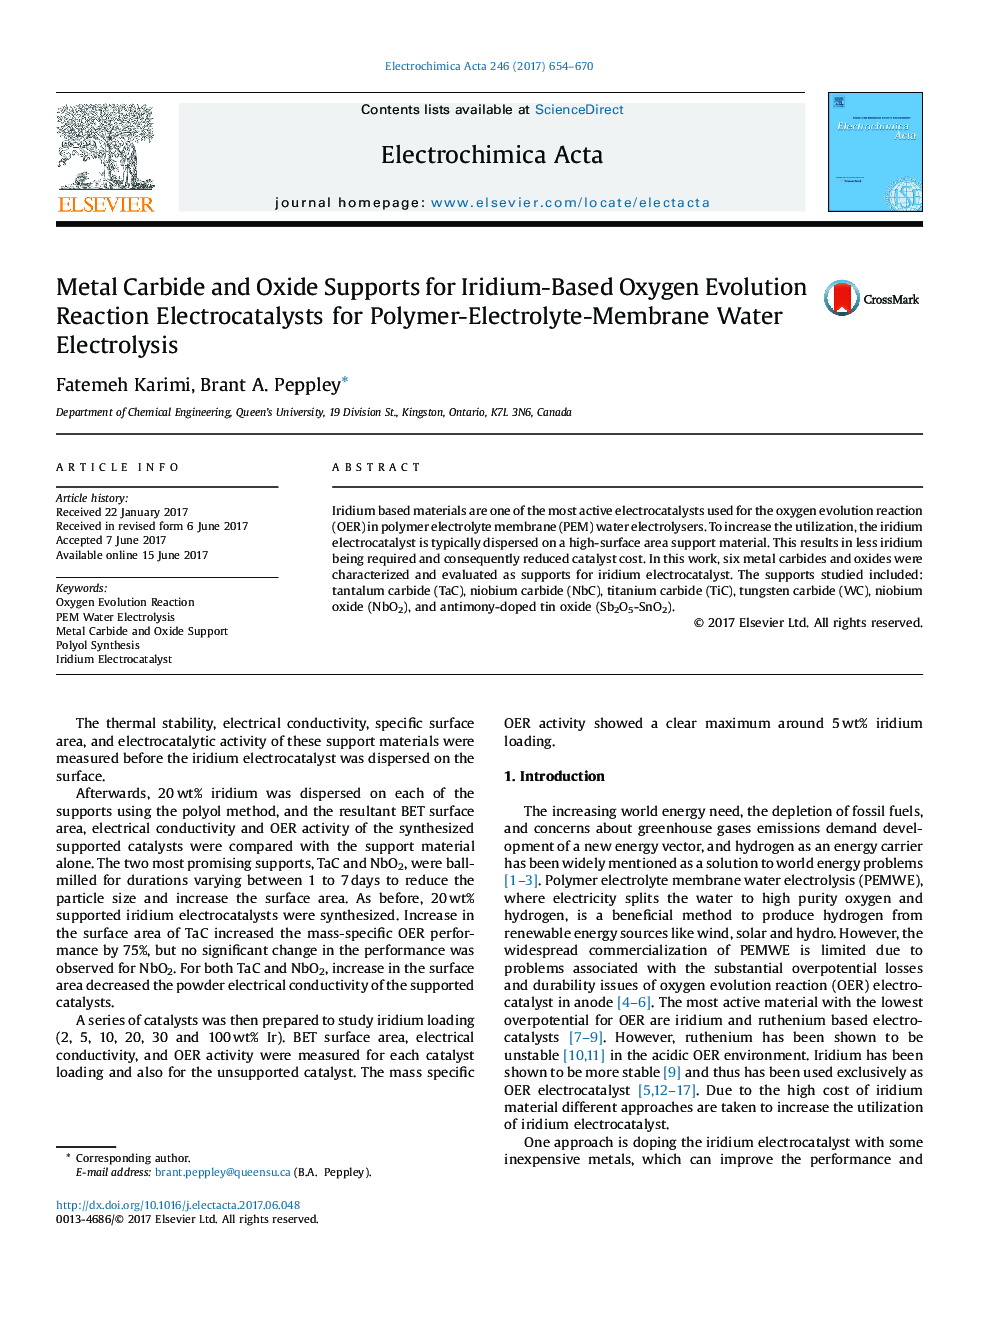 Metal Carbide and Oxide Supports for Iridium-Based Oxygen Evolution Reaction Electrocatalysts for Polymer-Electrolyte-Membrane Water Electrolysis